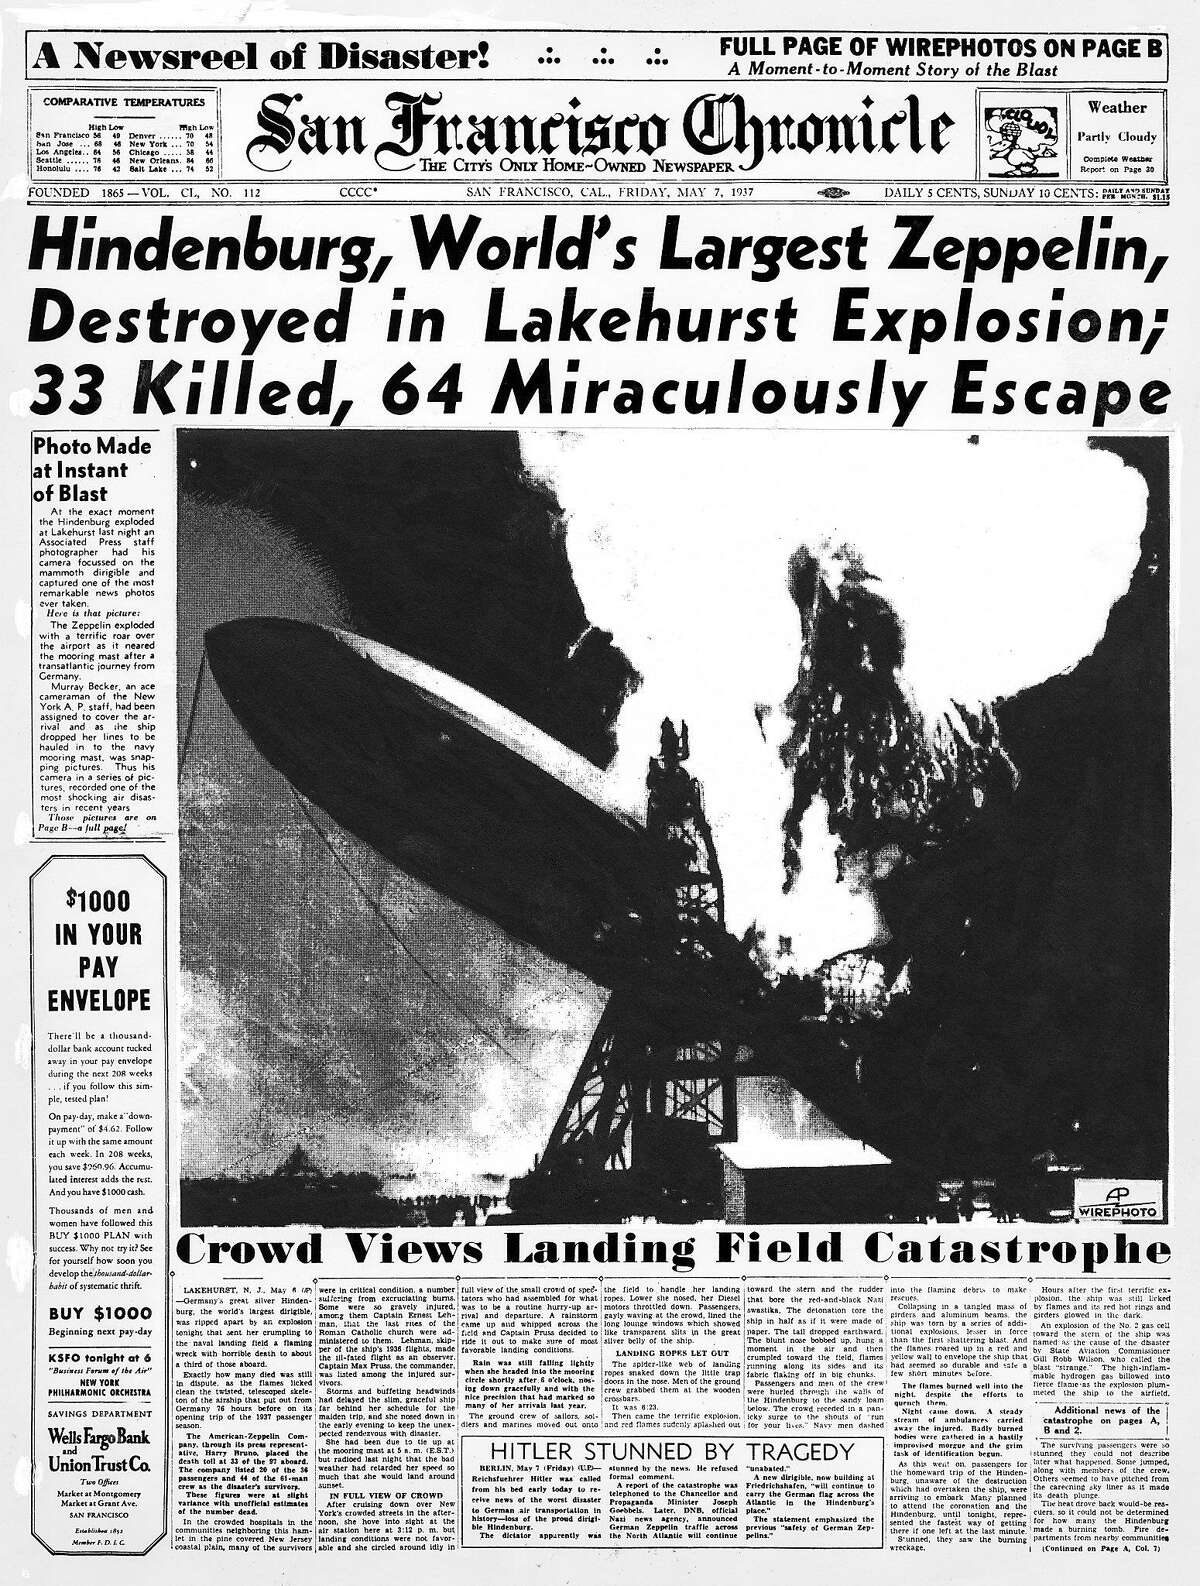 write a one page essay on the hindenburg disaster